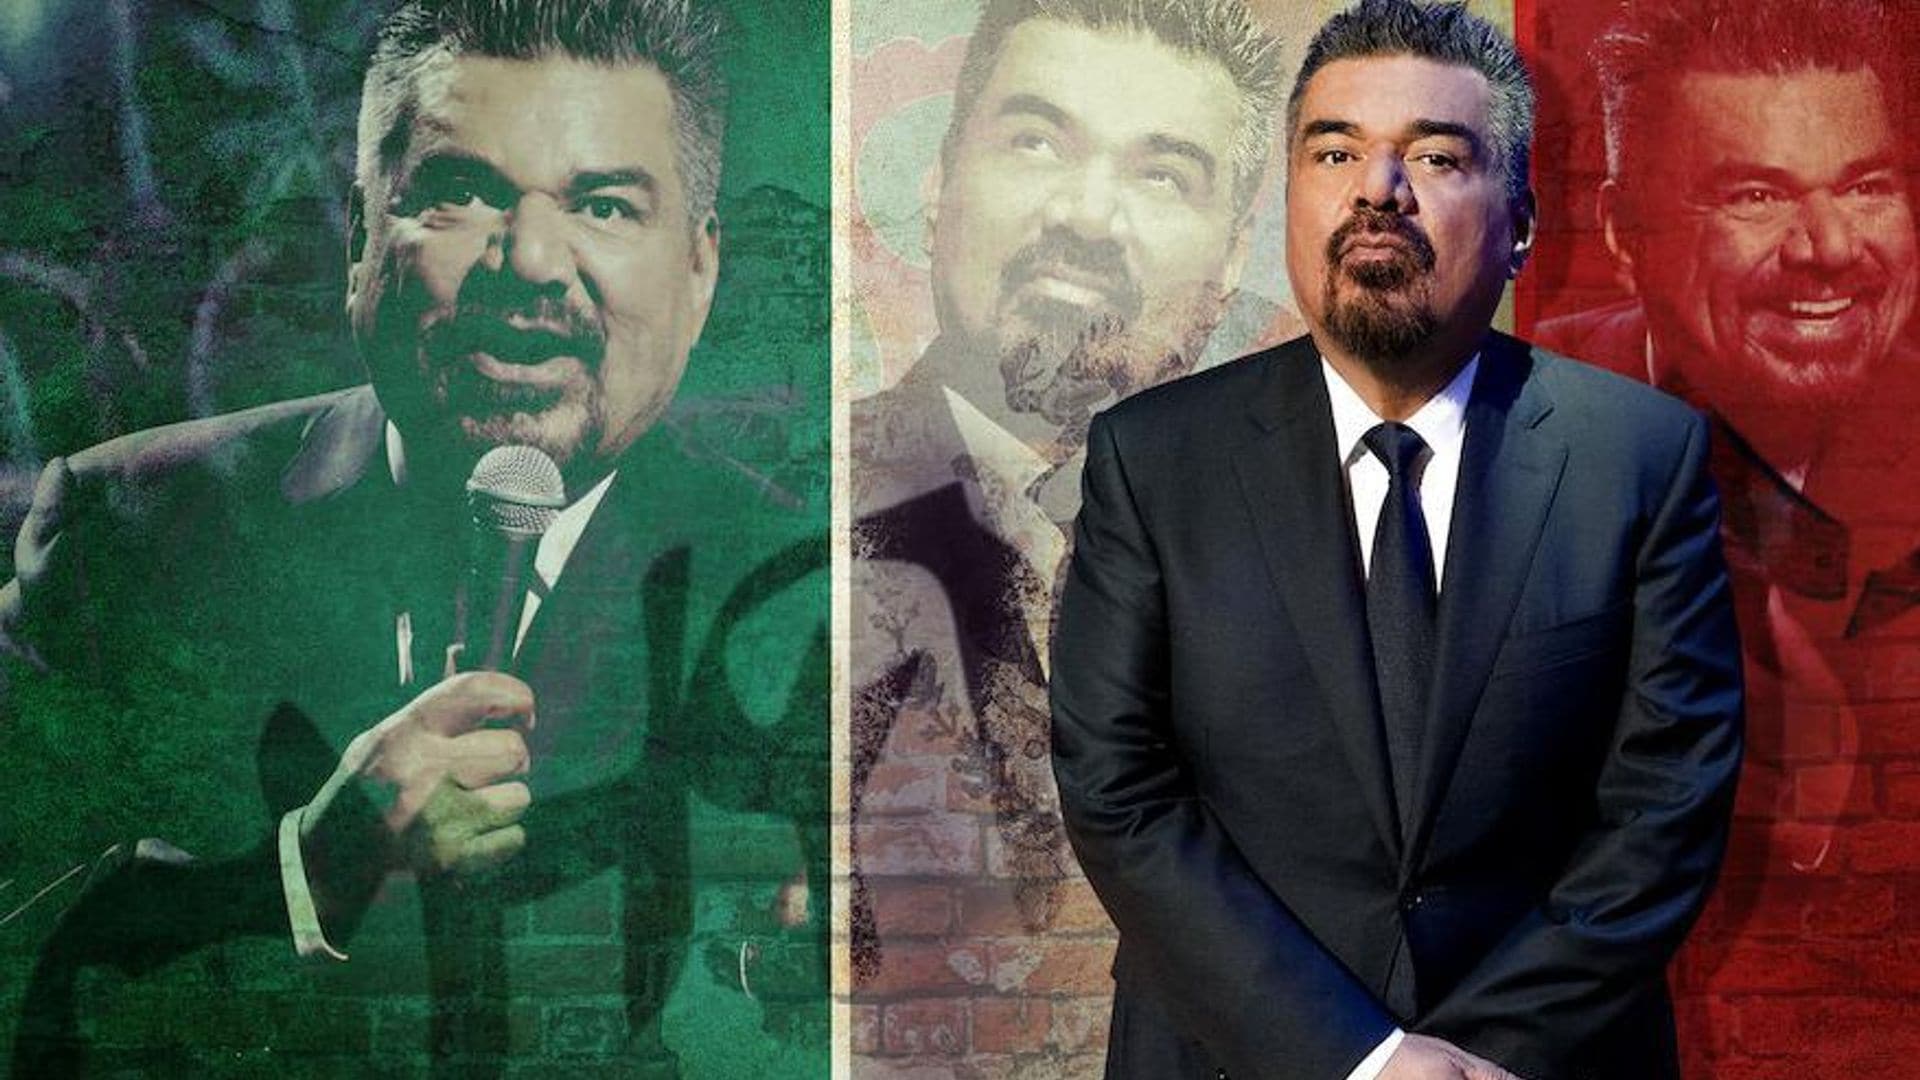 George Lopez premieres his first Netflix comedy special ‘We’ll Do It For Half’